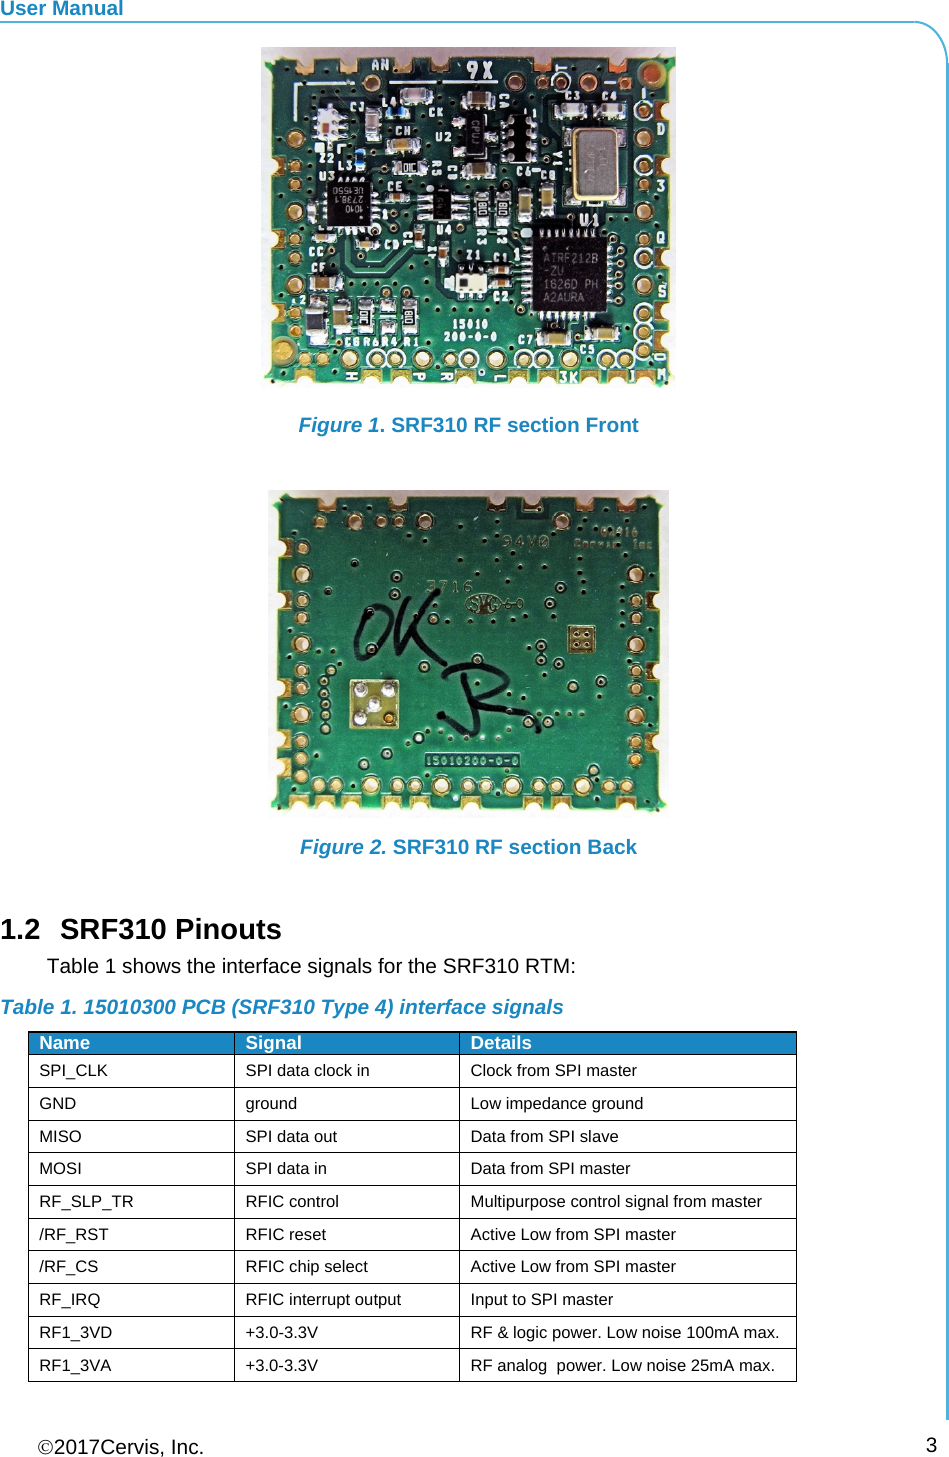 User Manual 2017Cervis, Inc.      3  Figure 1. SRF310 RF section Front   Figure 2. SRF310 RF section Back  1.2 SRF310 Pinouts Table 1 shows the interface signals for the SRF310 RTM: Table 1. 15010300 PCB (SRF310 Type 4) interface signals Name  Signal DetailsSPI_CLK  SPI data clock in  Clock from SPI master GND ground  Low impedance ground MISO  SPI data out  Data from SPI slave MOSI  SPI data in  Data from SPI master RF_SLP_TR RFIC control  Multipurpose control signal from master /RF_RST  RFIC reset  Active Low from SPI master /RF_CS  RFIC chip select  Active Low from SPI master RF_IRQ  RFIC interrupt output  Input to SPI master RF1_3VD  +3.0-3.3V  RF &amp; logic power. Low noise 100mA max. RF1_3VA  +3.0-3.3V  RF analog  power. Low noise 25mA max. 